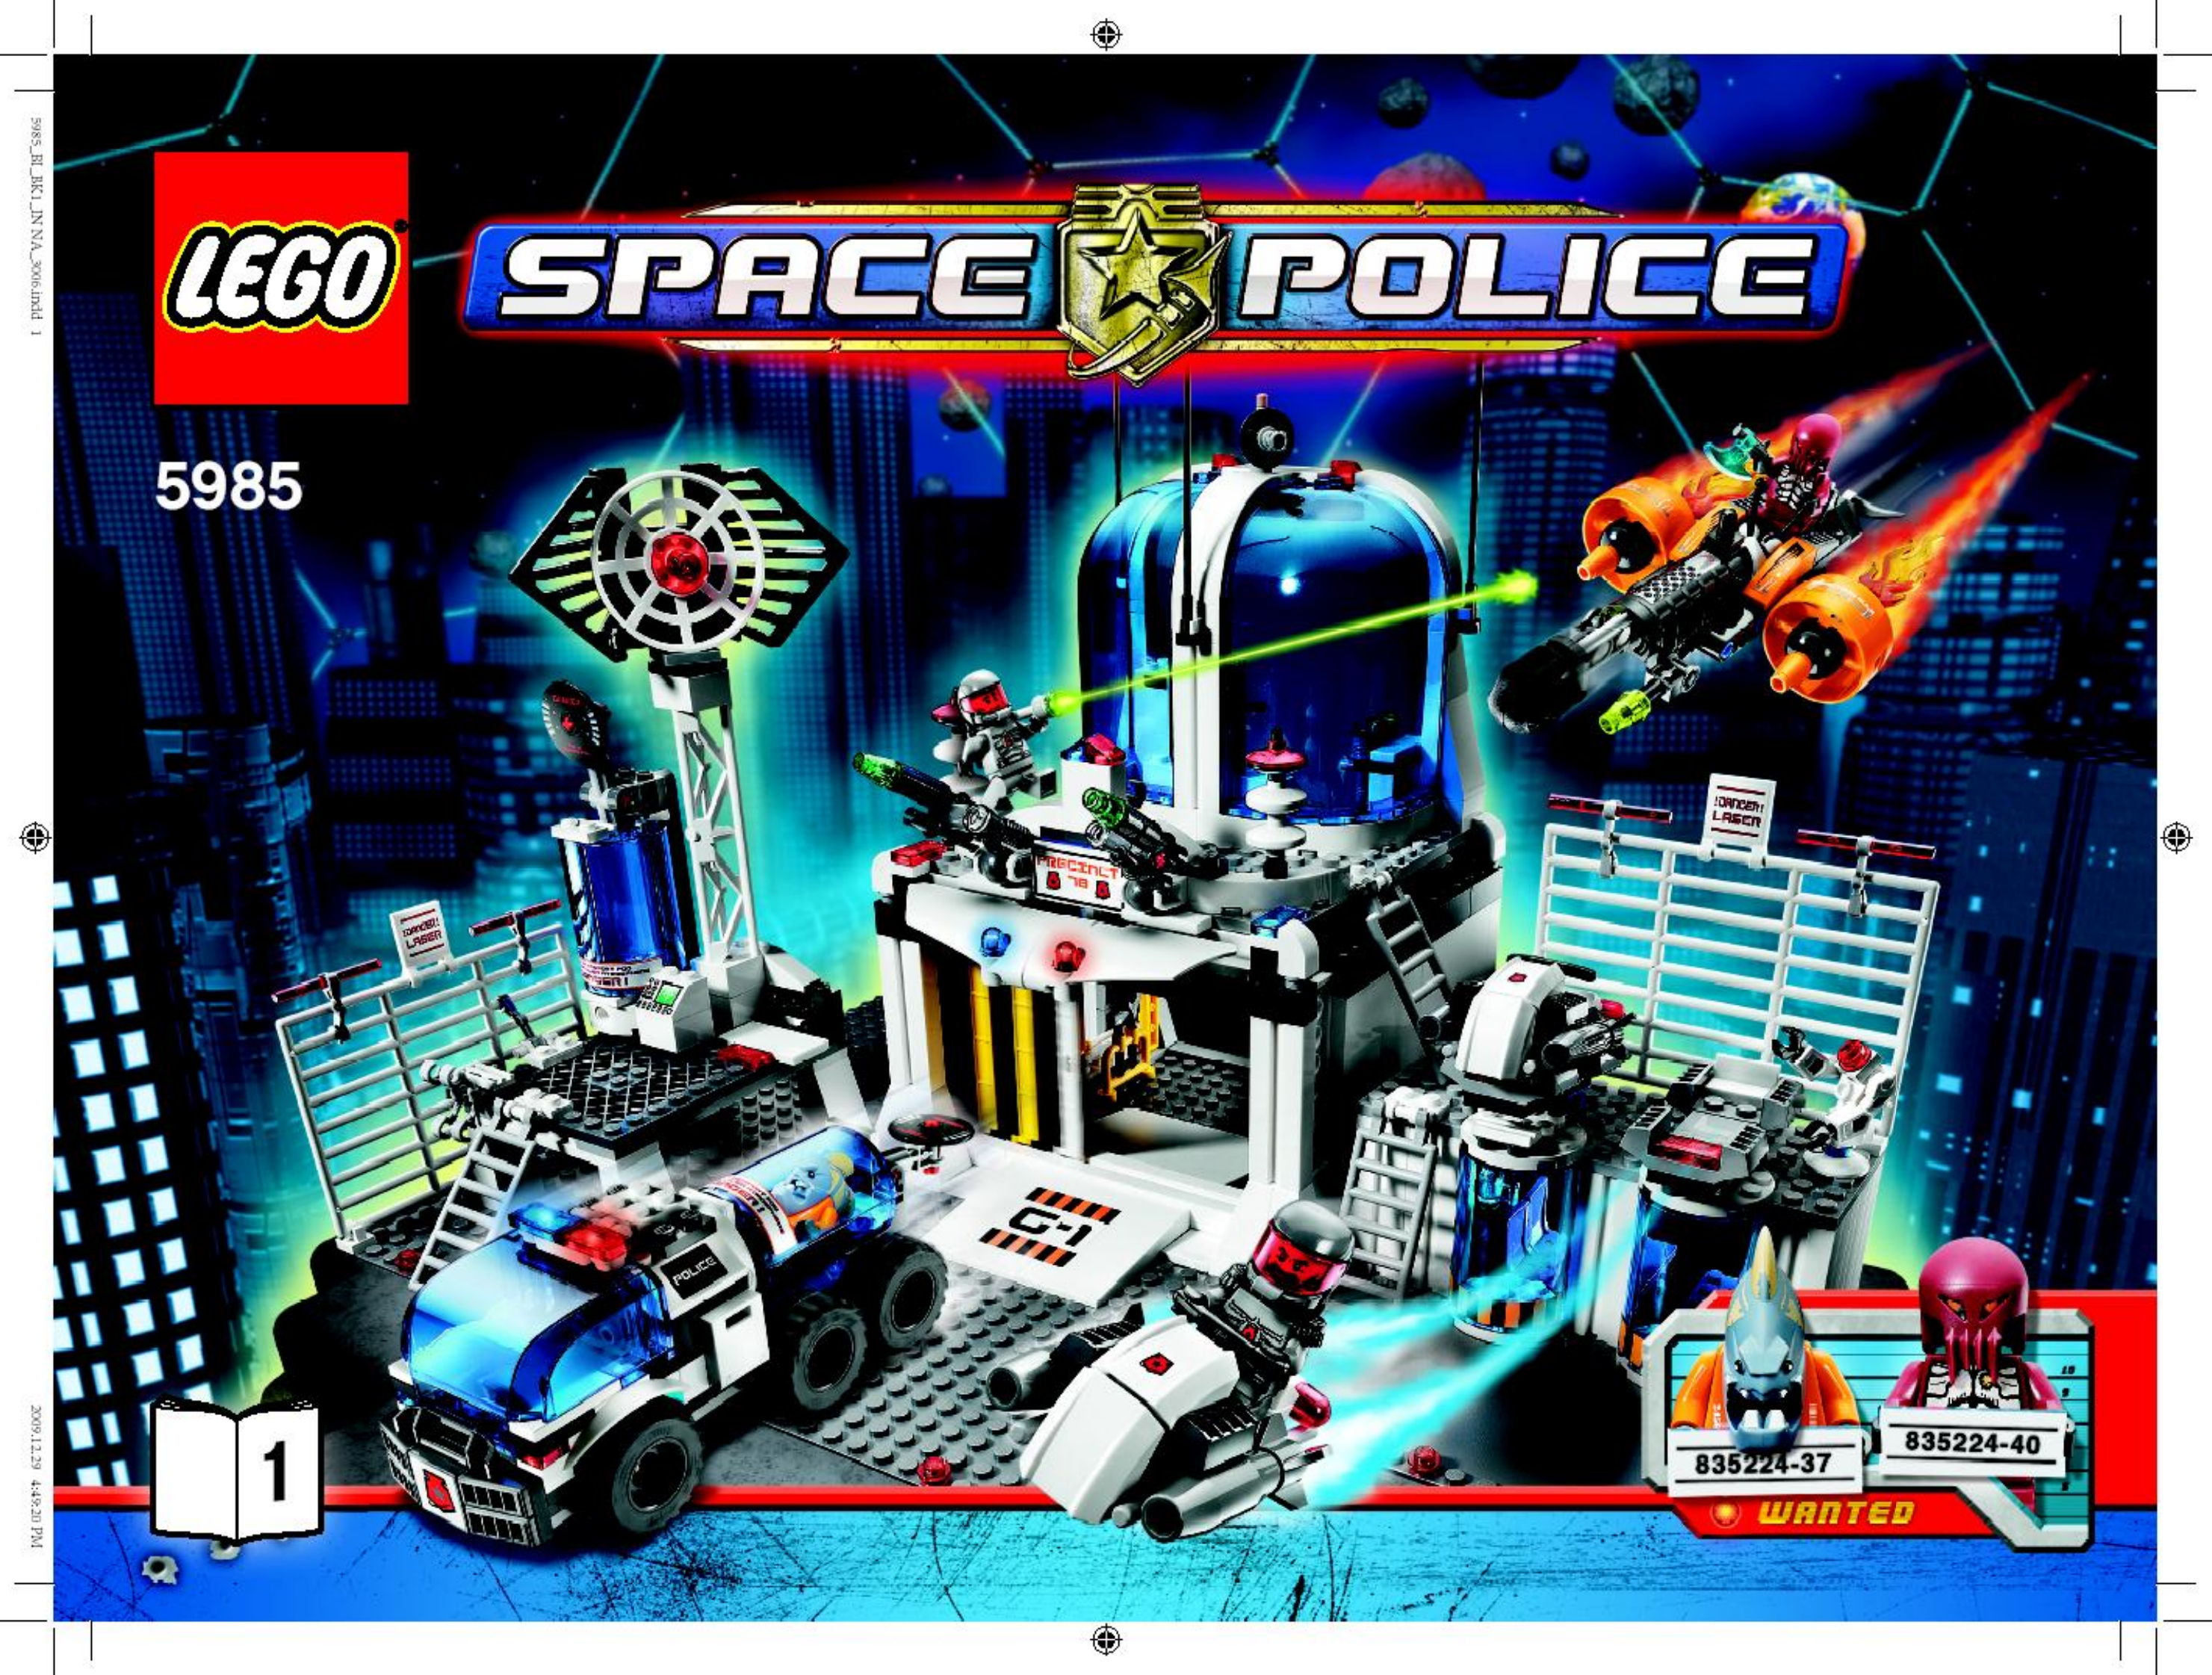 blend mode precedent Lego Space Police Headquarters Online, SAVE 41% - syracuseutaharts.org